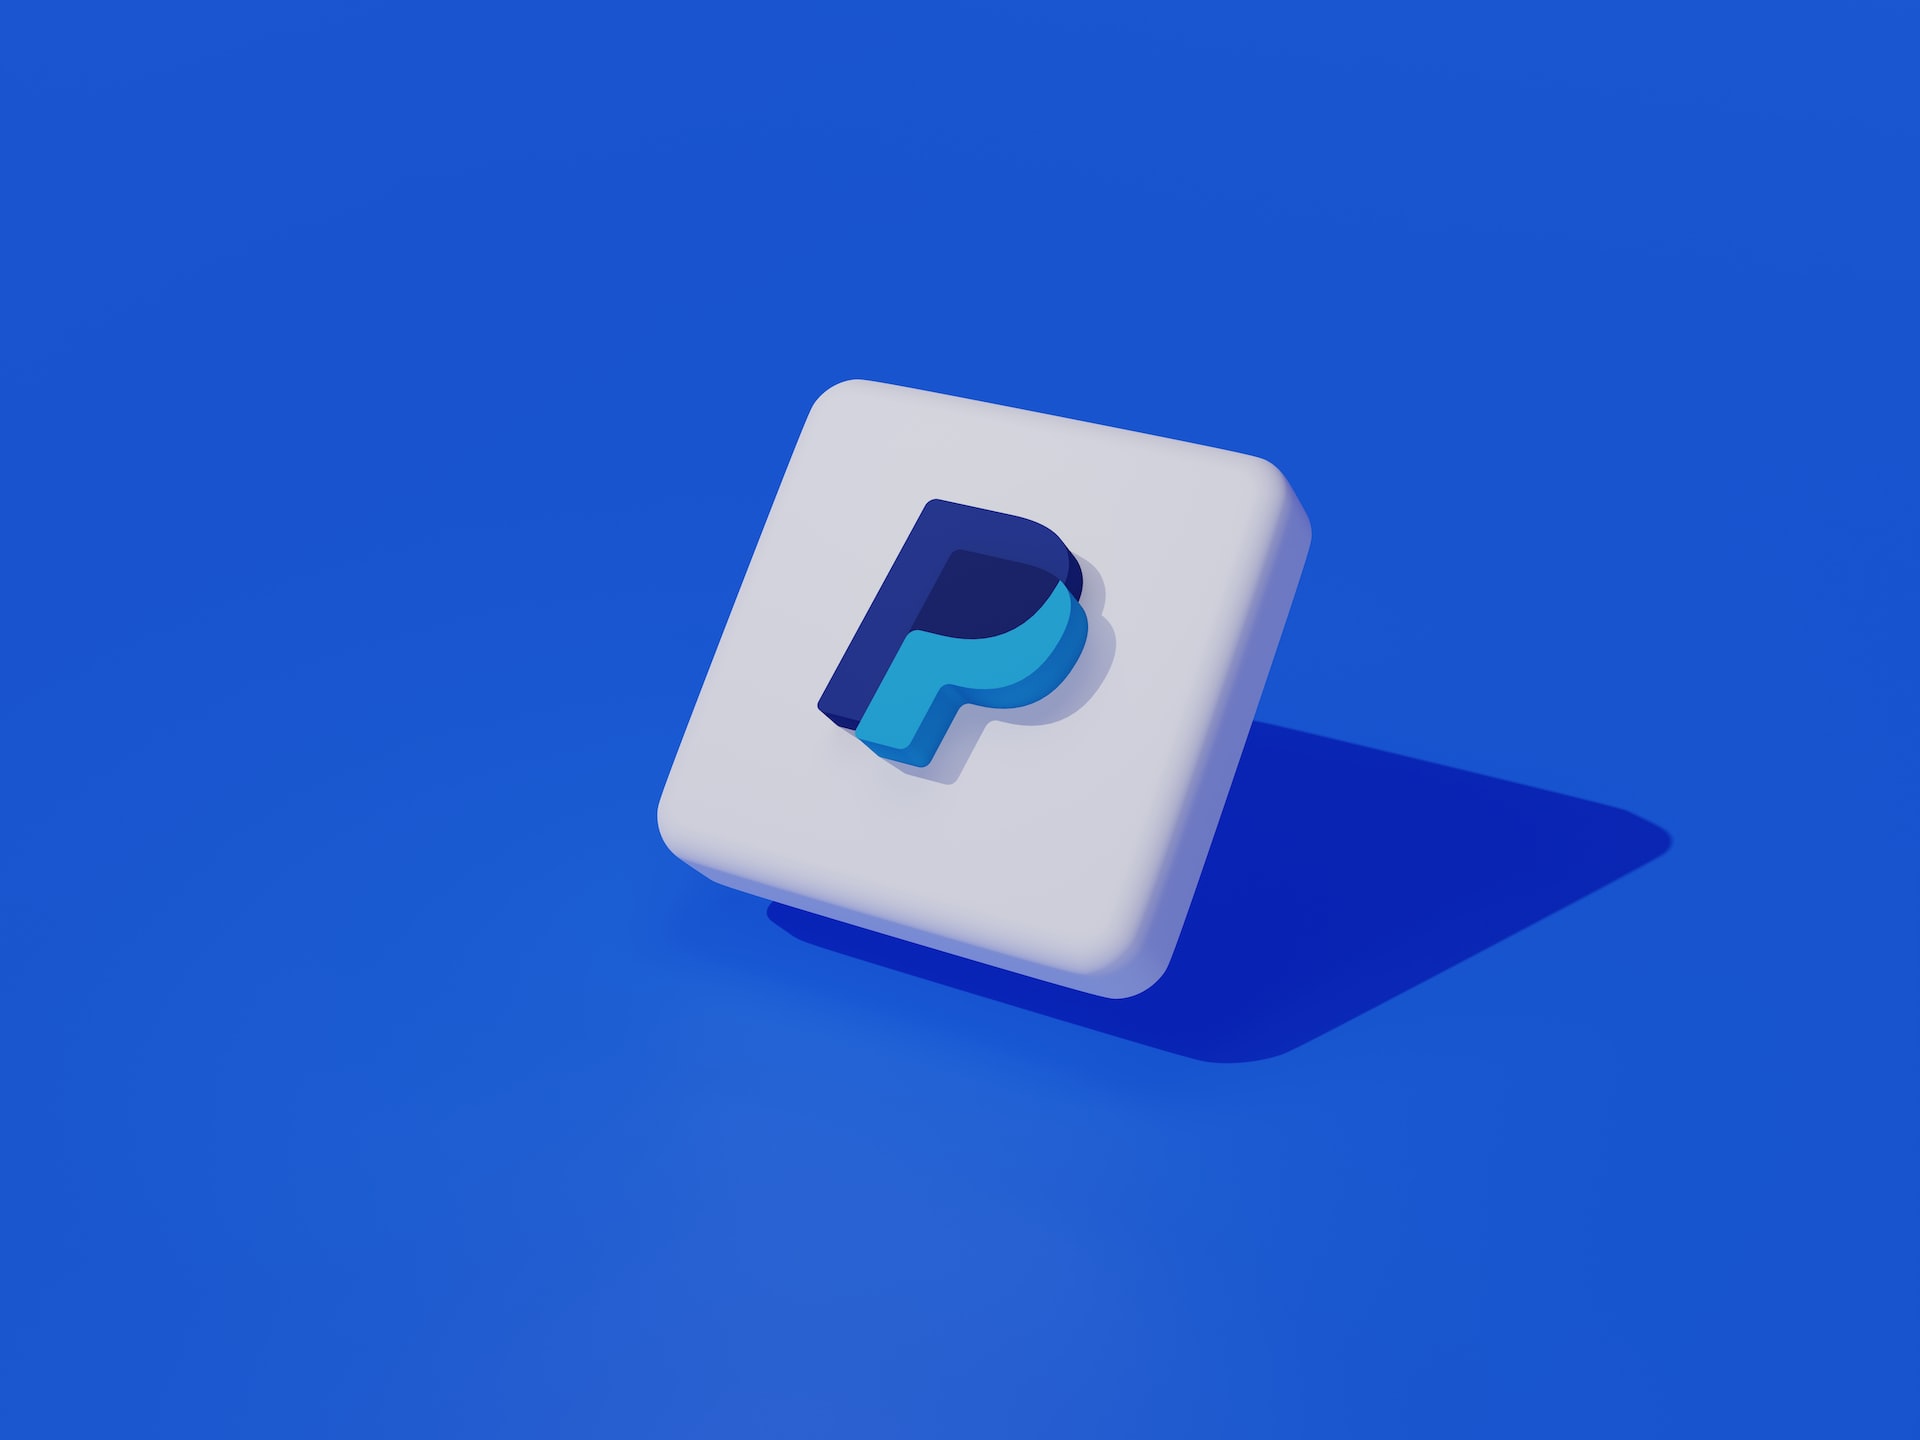 The PayPal logo represented as a 3D icon against a blue background.